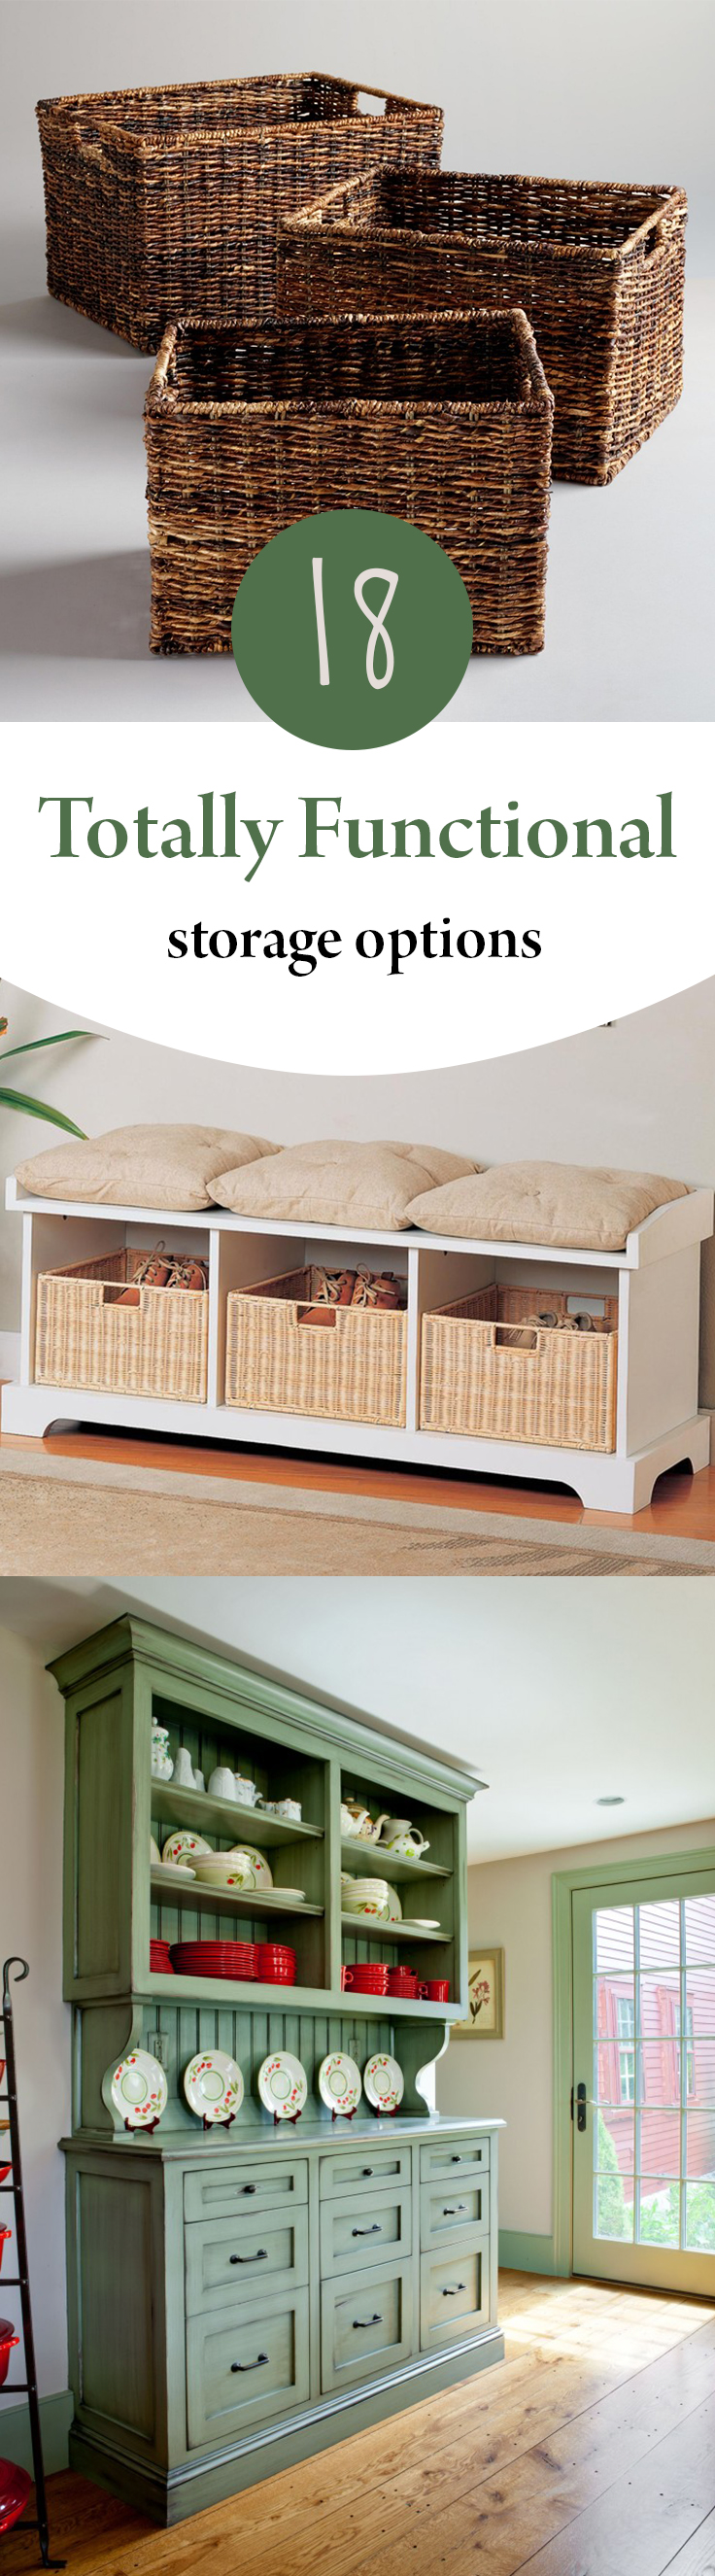 Storage Hacks, Small Space Living, Storage Ideas, Home Organization, Clutter Free Home, Declutter Your Home, How to Declutter Your Home, Cleaning and Organization, Popular Pin